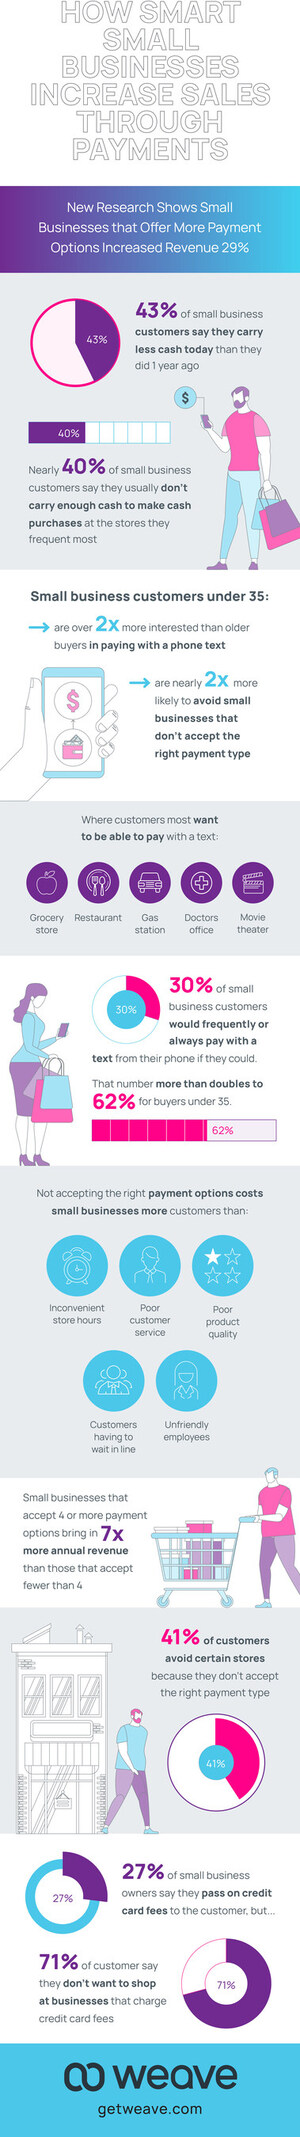 Study: Small Businesses Offering Multiple Payment Options Increase Revenue by Nearly 30 Percent